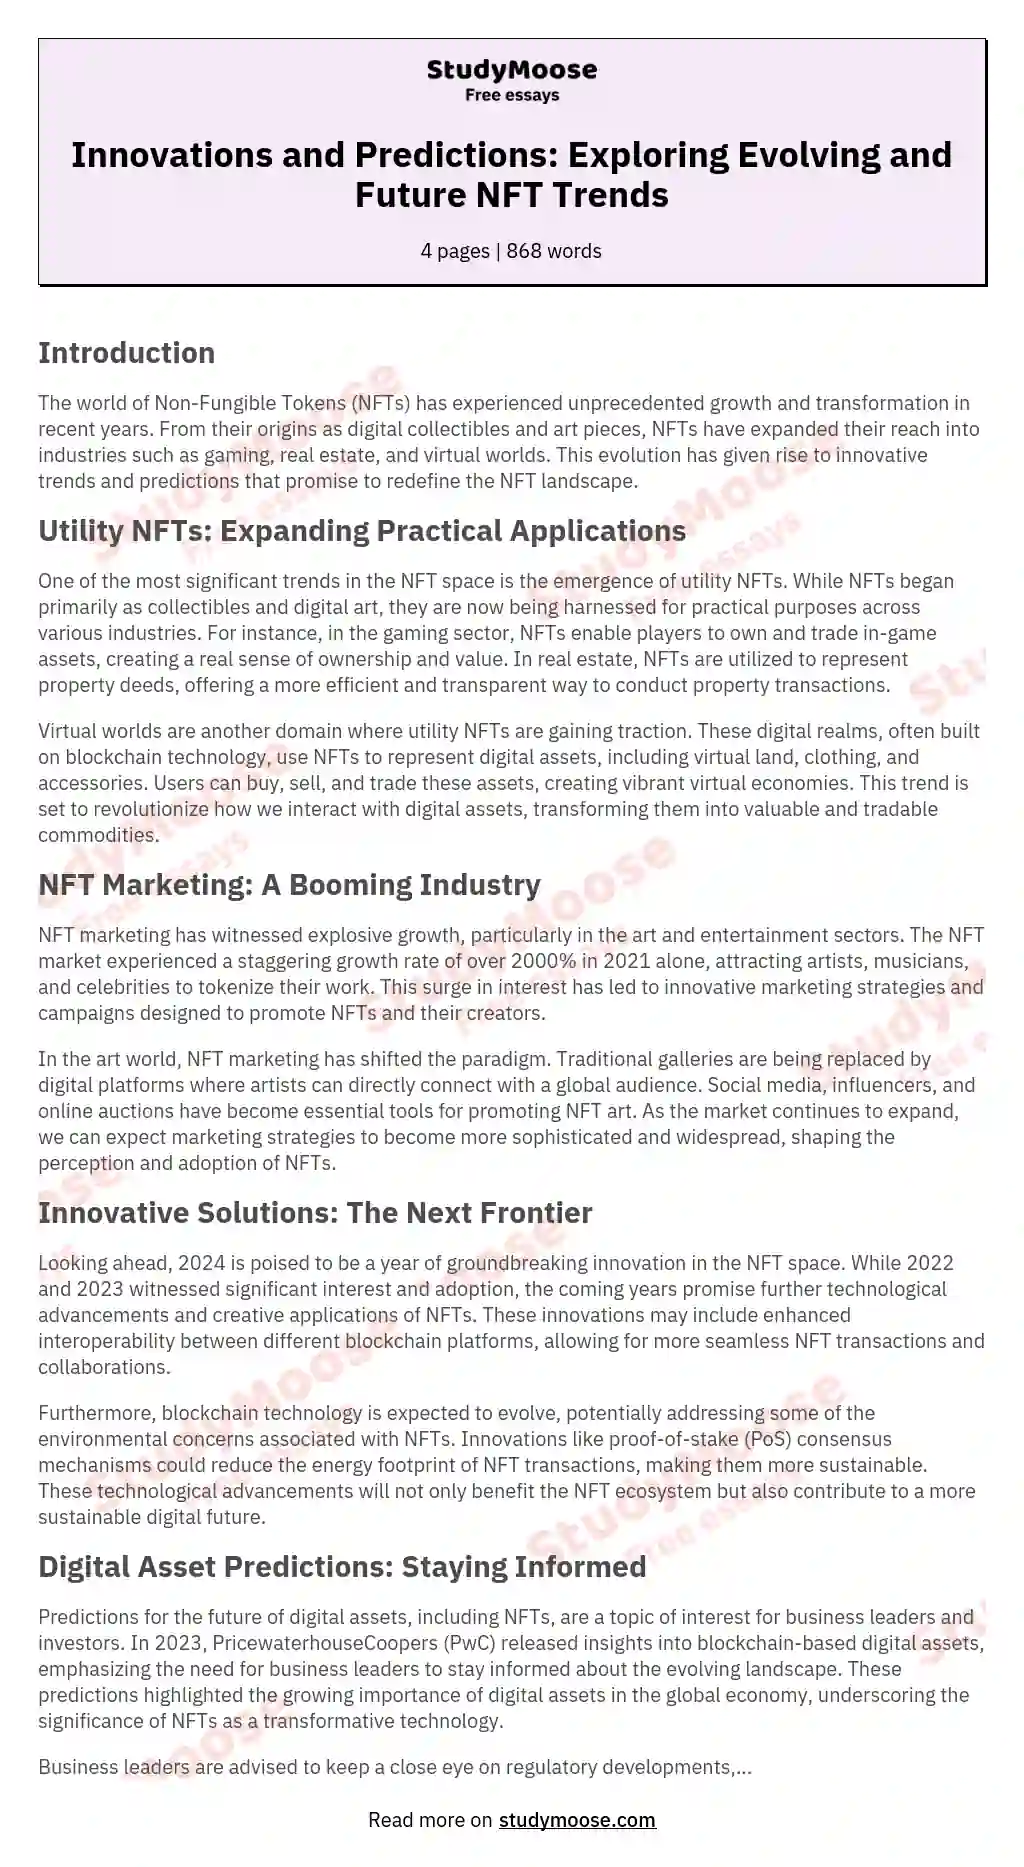 Innovations and Predictions: Exploring Evolving and Future NFT Trends essay